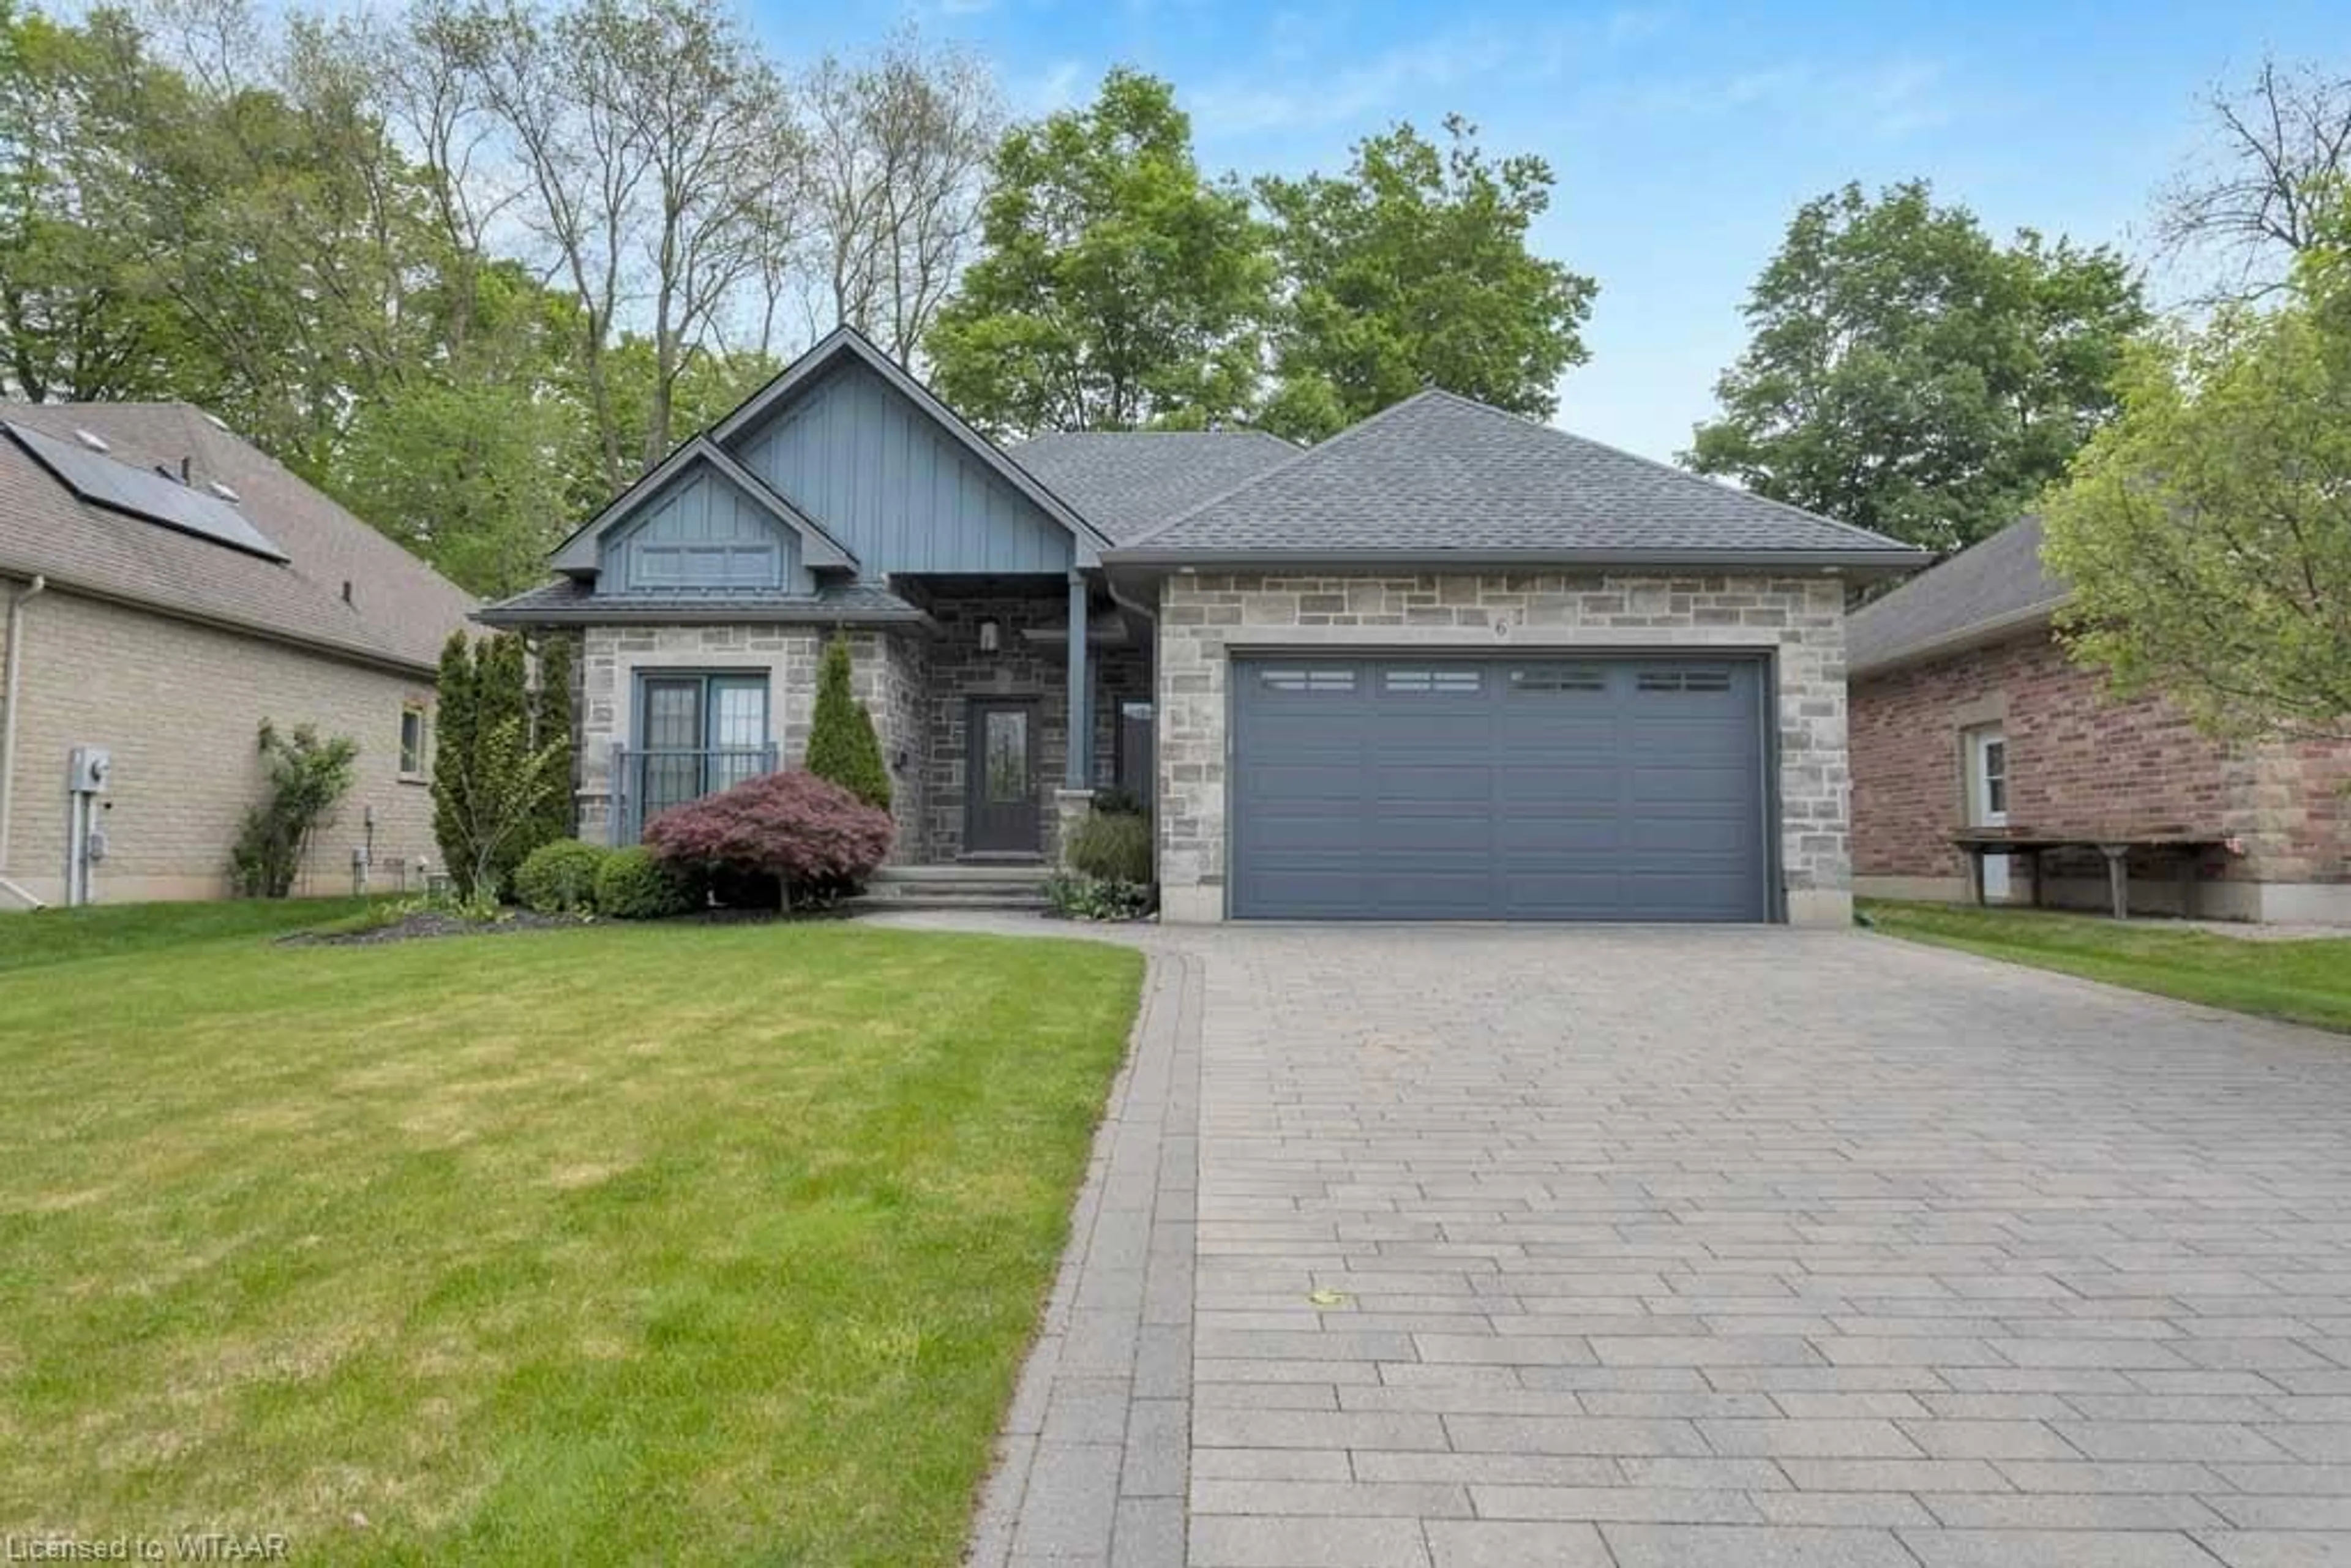 Home with brick exterior material for 6 Wood Haven Drive Dr, Tillsonburg Ontario N4G 0A4